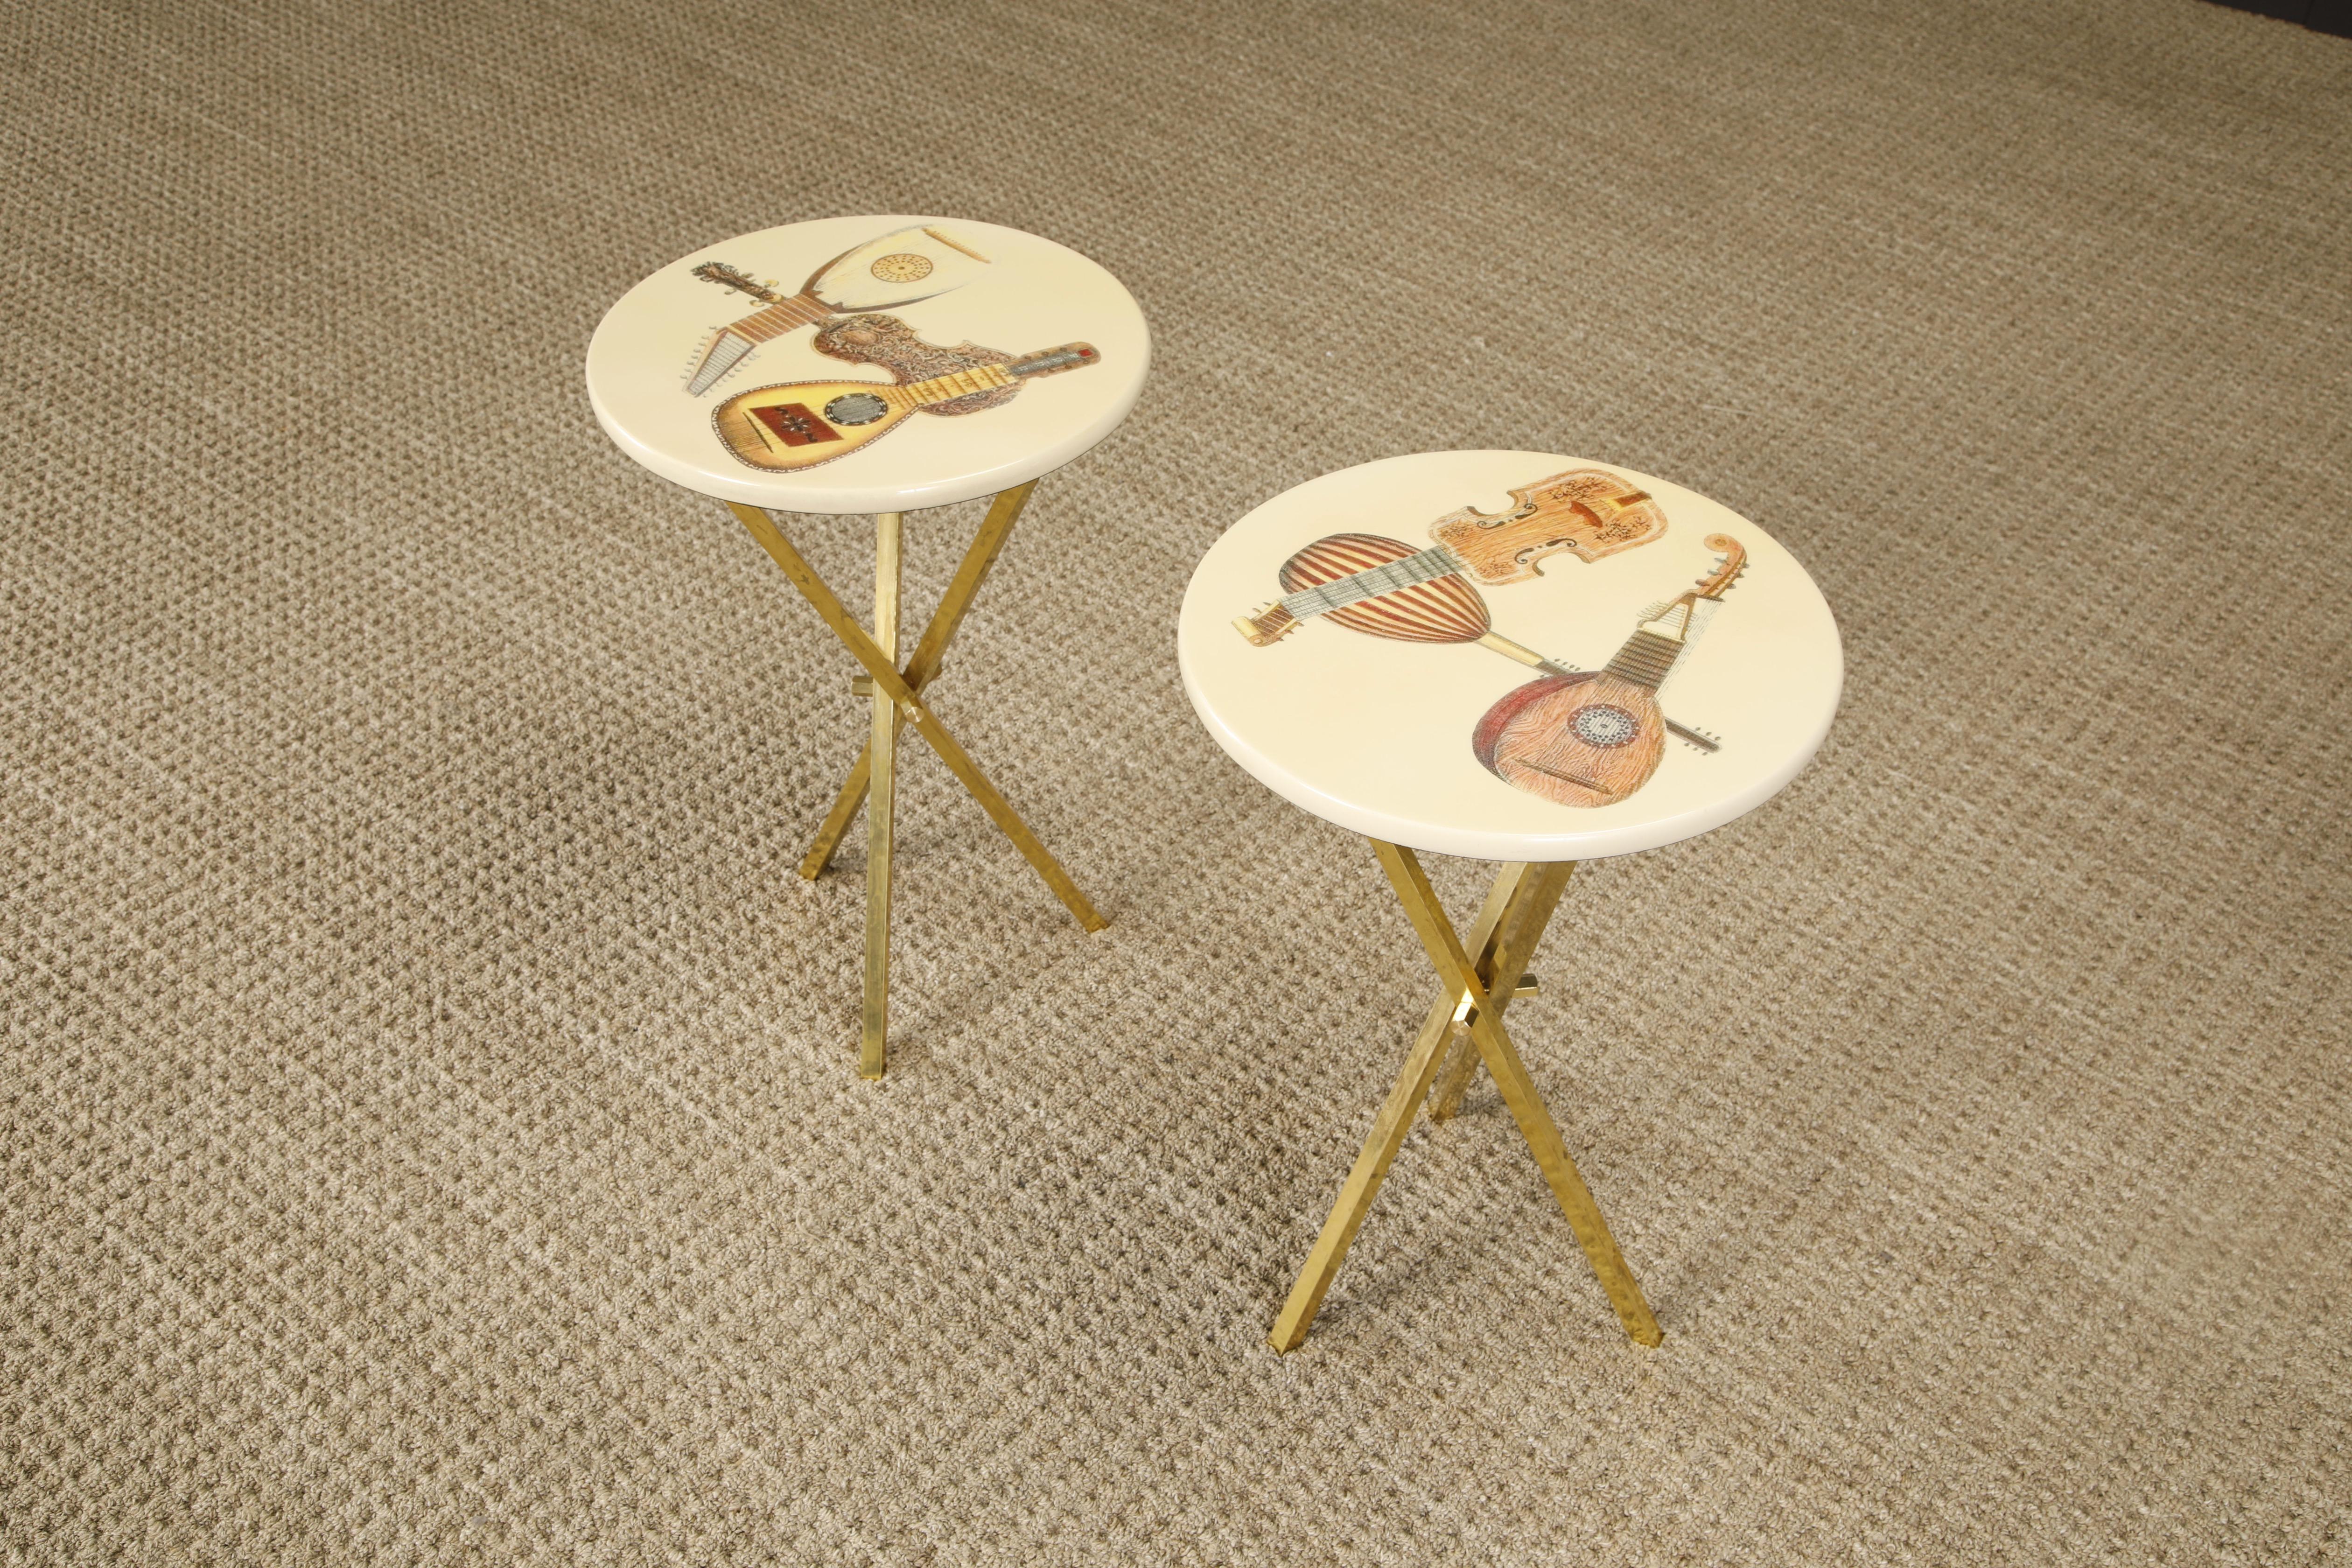 Late 20th Century 'Strumenti Musicali' Drinks / Side Tables by Piero Fornasetti, c 1970s, Signed For Sale